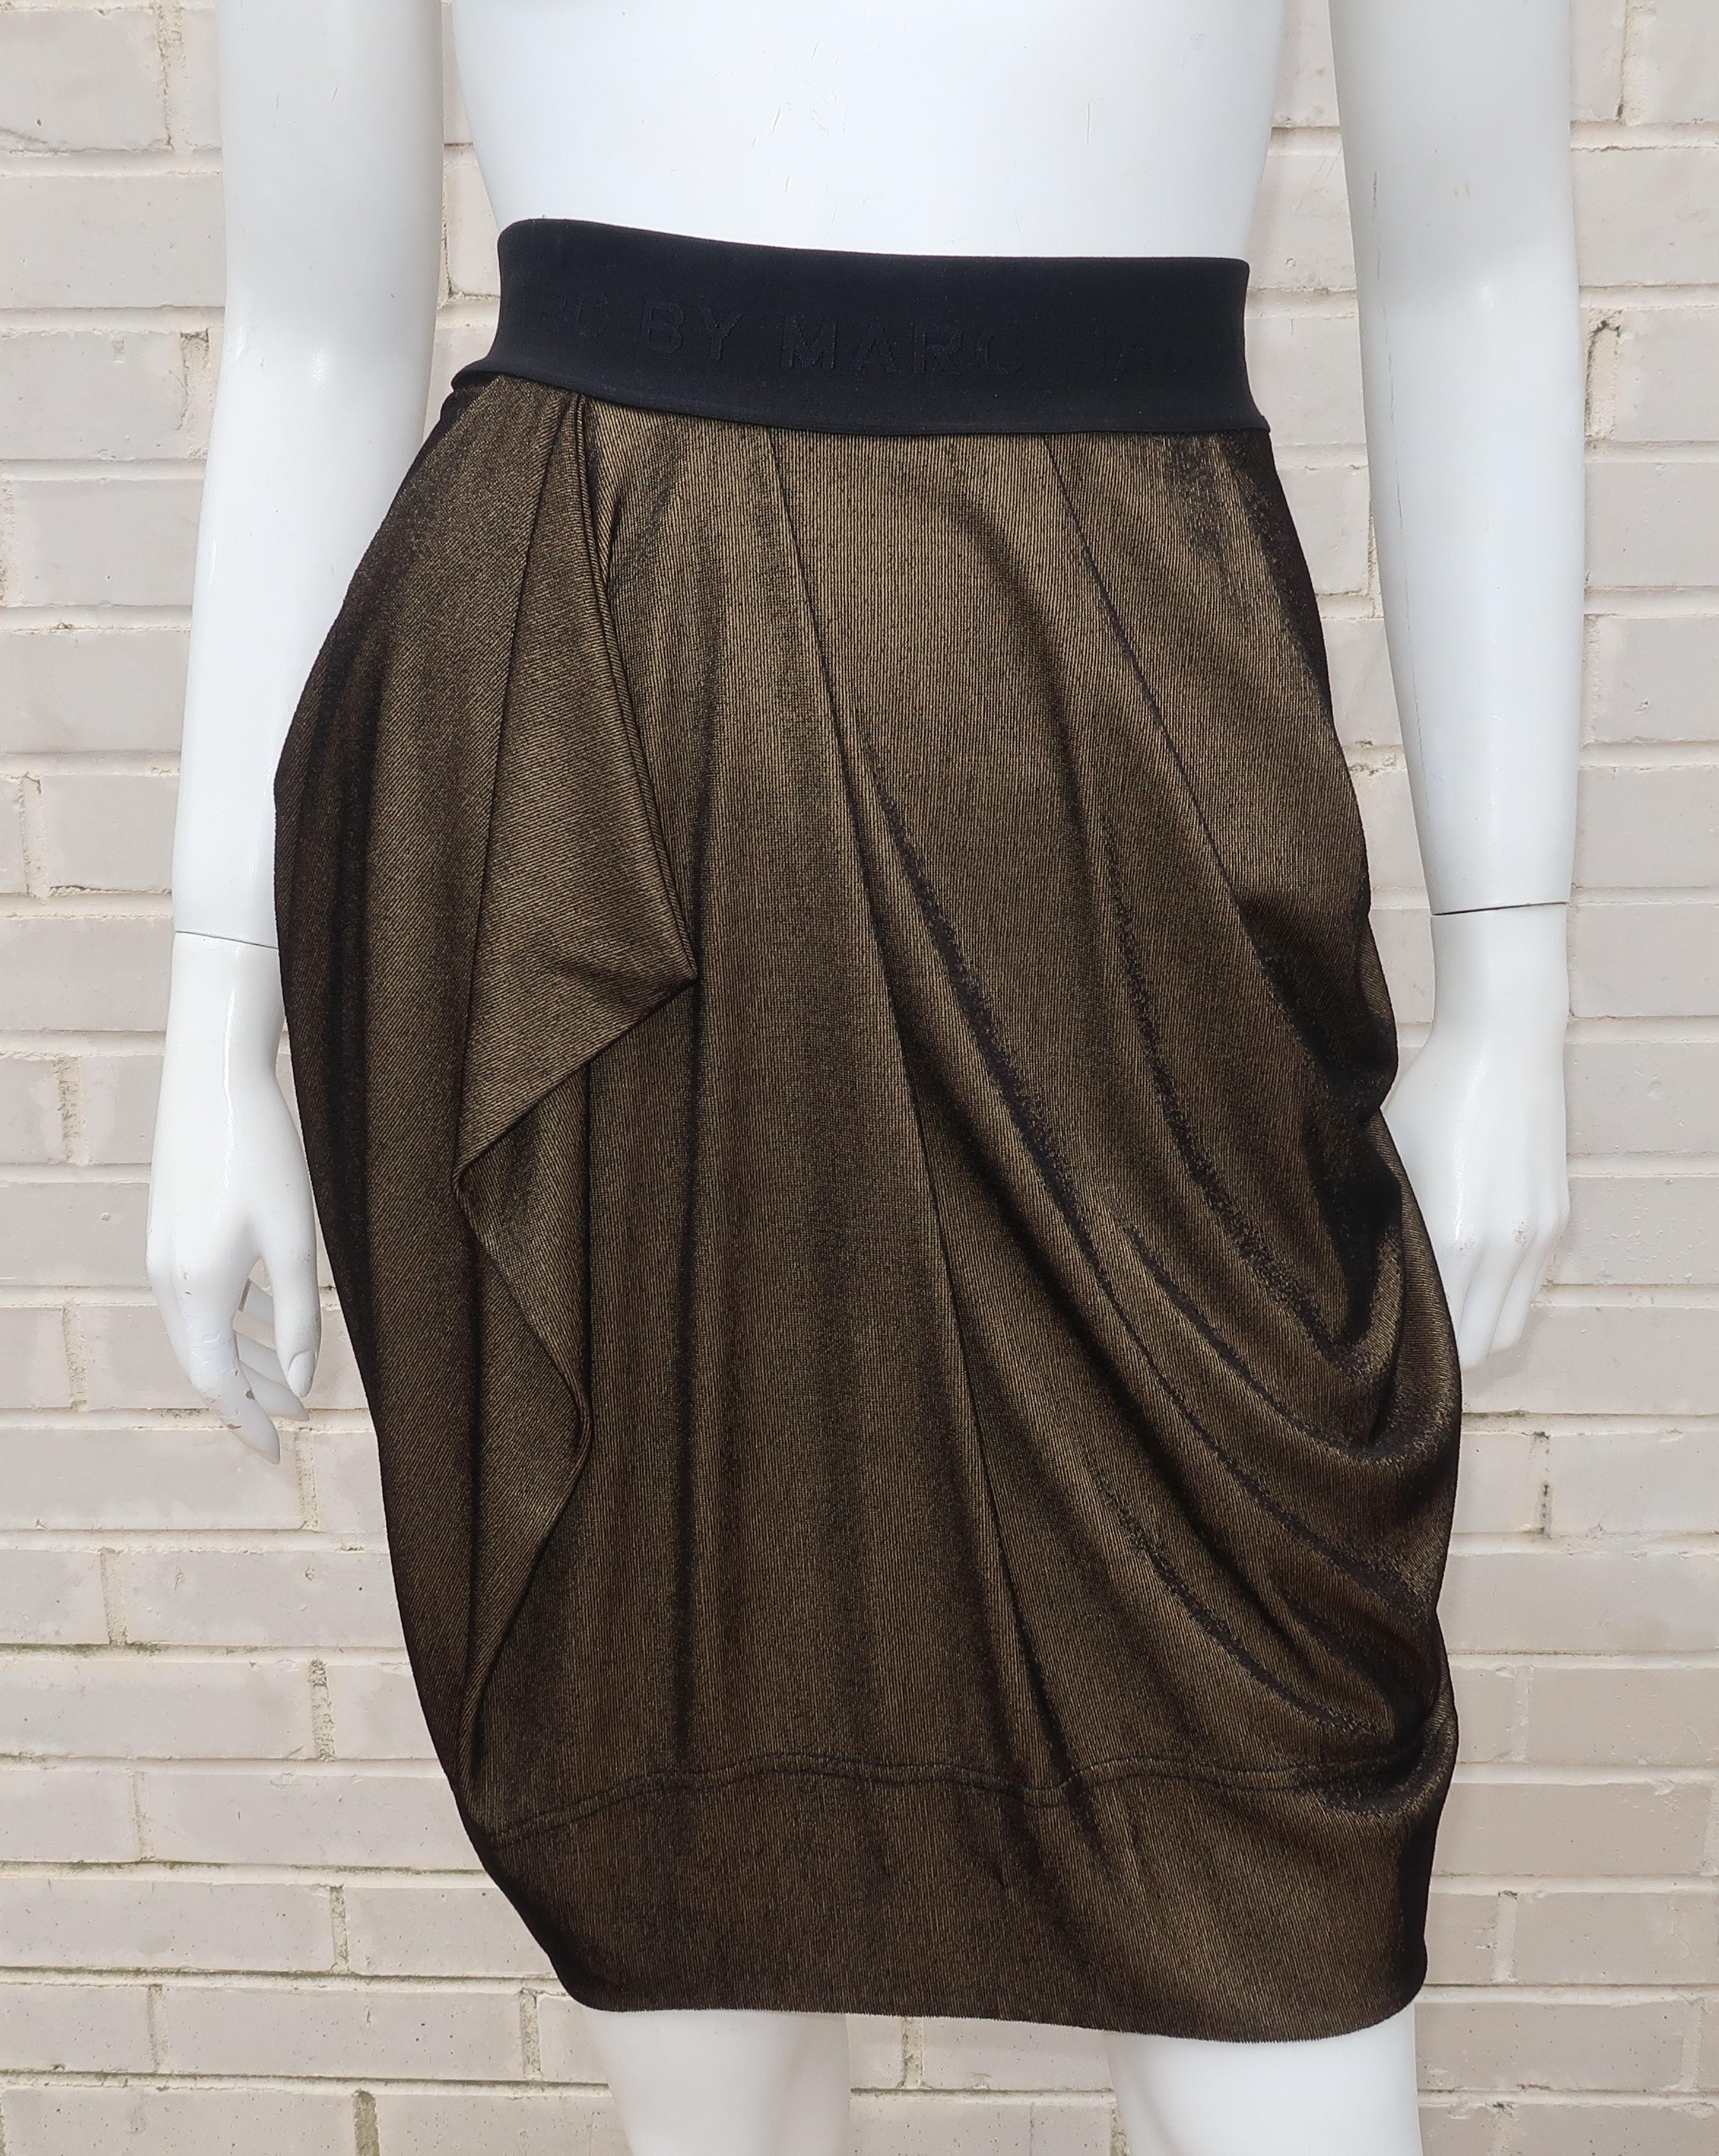 This Marc by Marc Jacobs skirt is like a fashionable take on boxing satins with a good dose of goddess style draping.  The wide black elastic waistband is imprinted with the Marc Jacobs logo and features a prominent gold zipper with a grosgrain pull